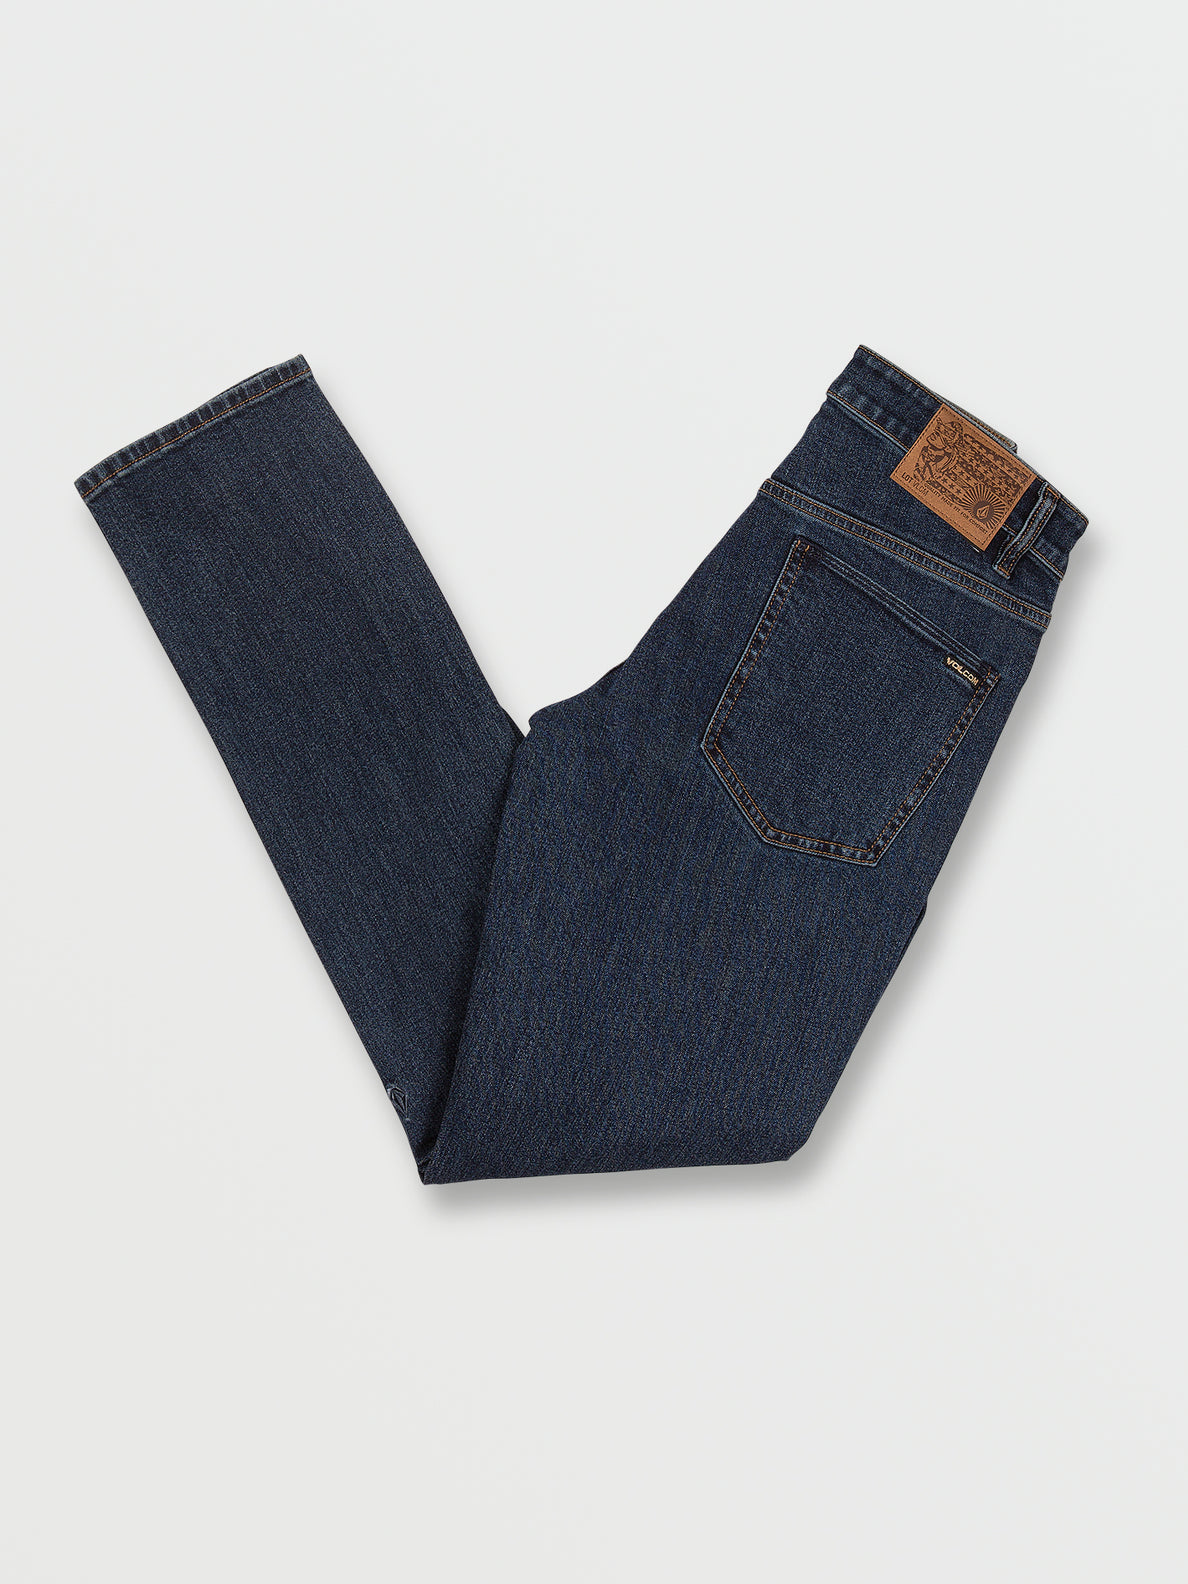 2x4 Skinny Fit Jeans - Dirty Med Blue (A1931510_DMB) [B]